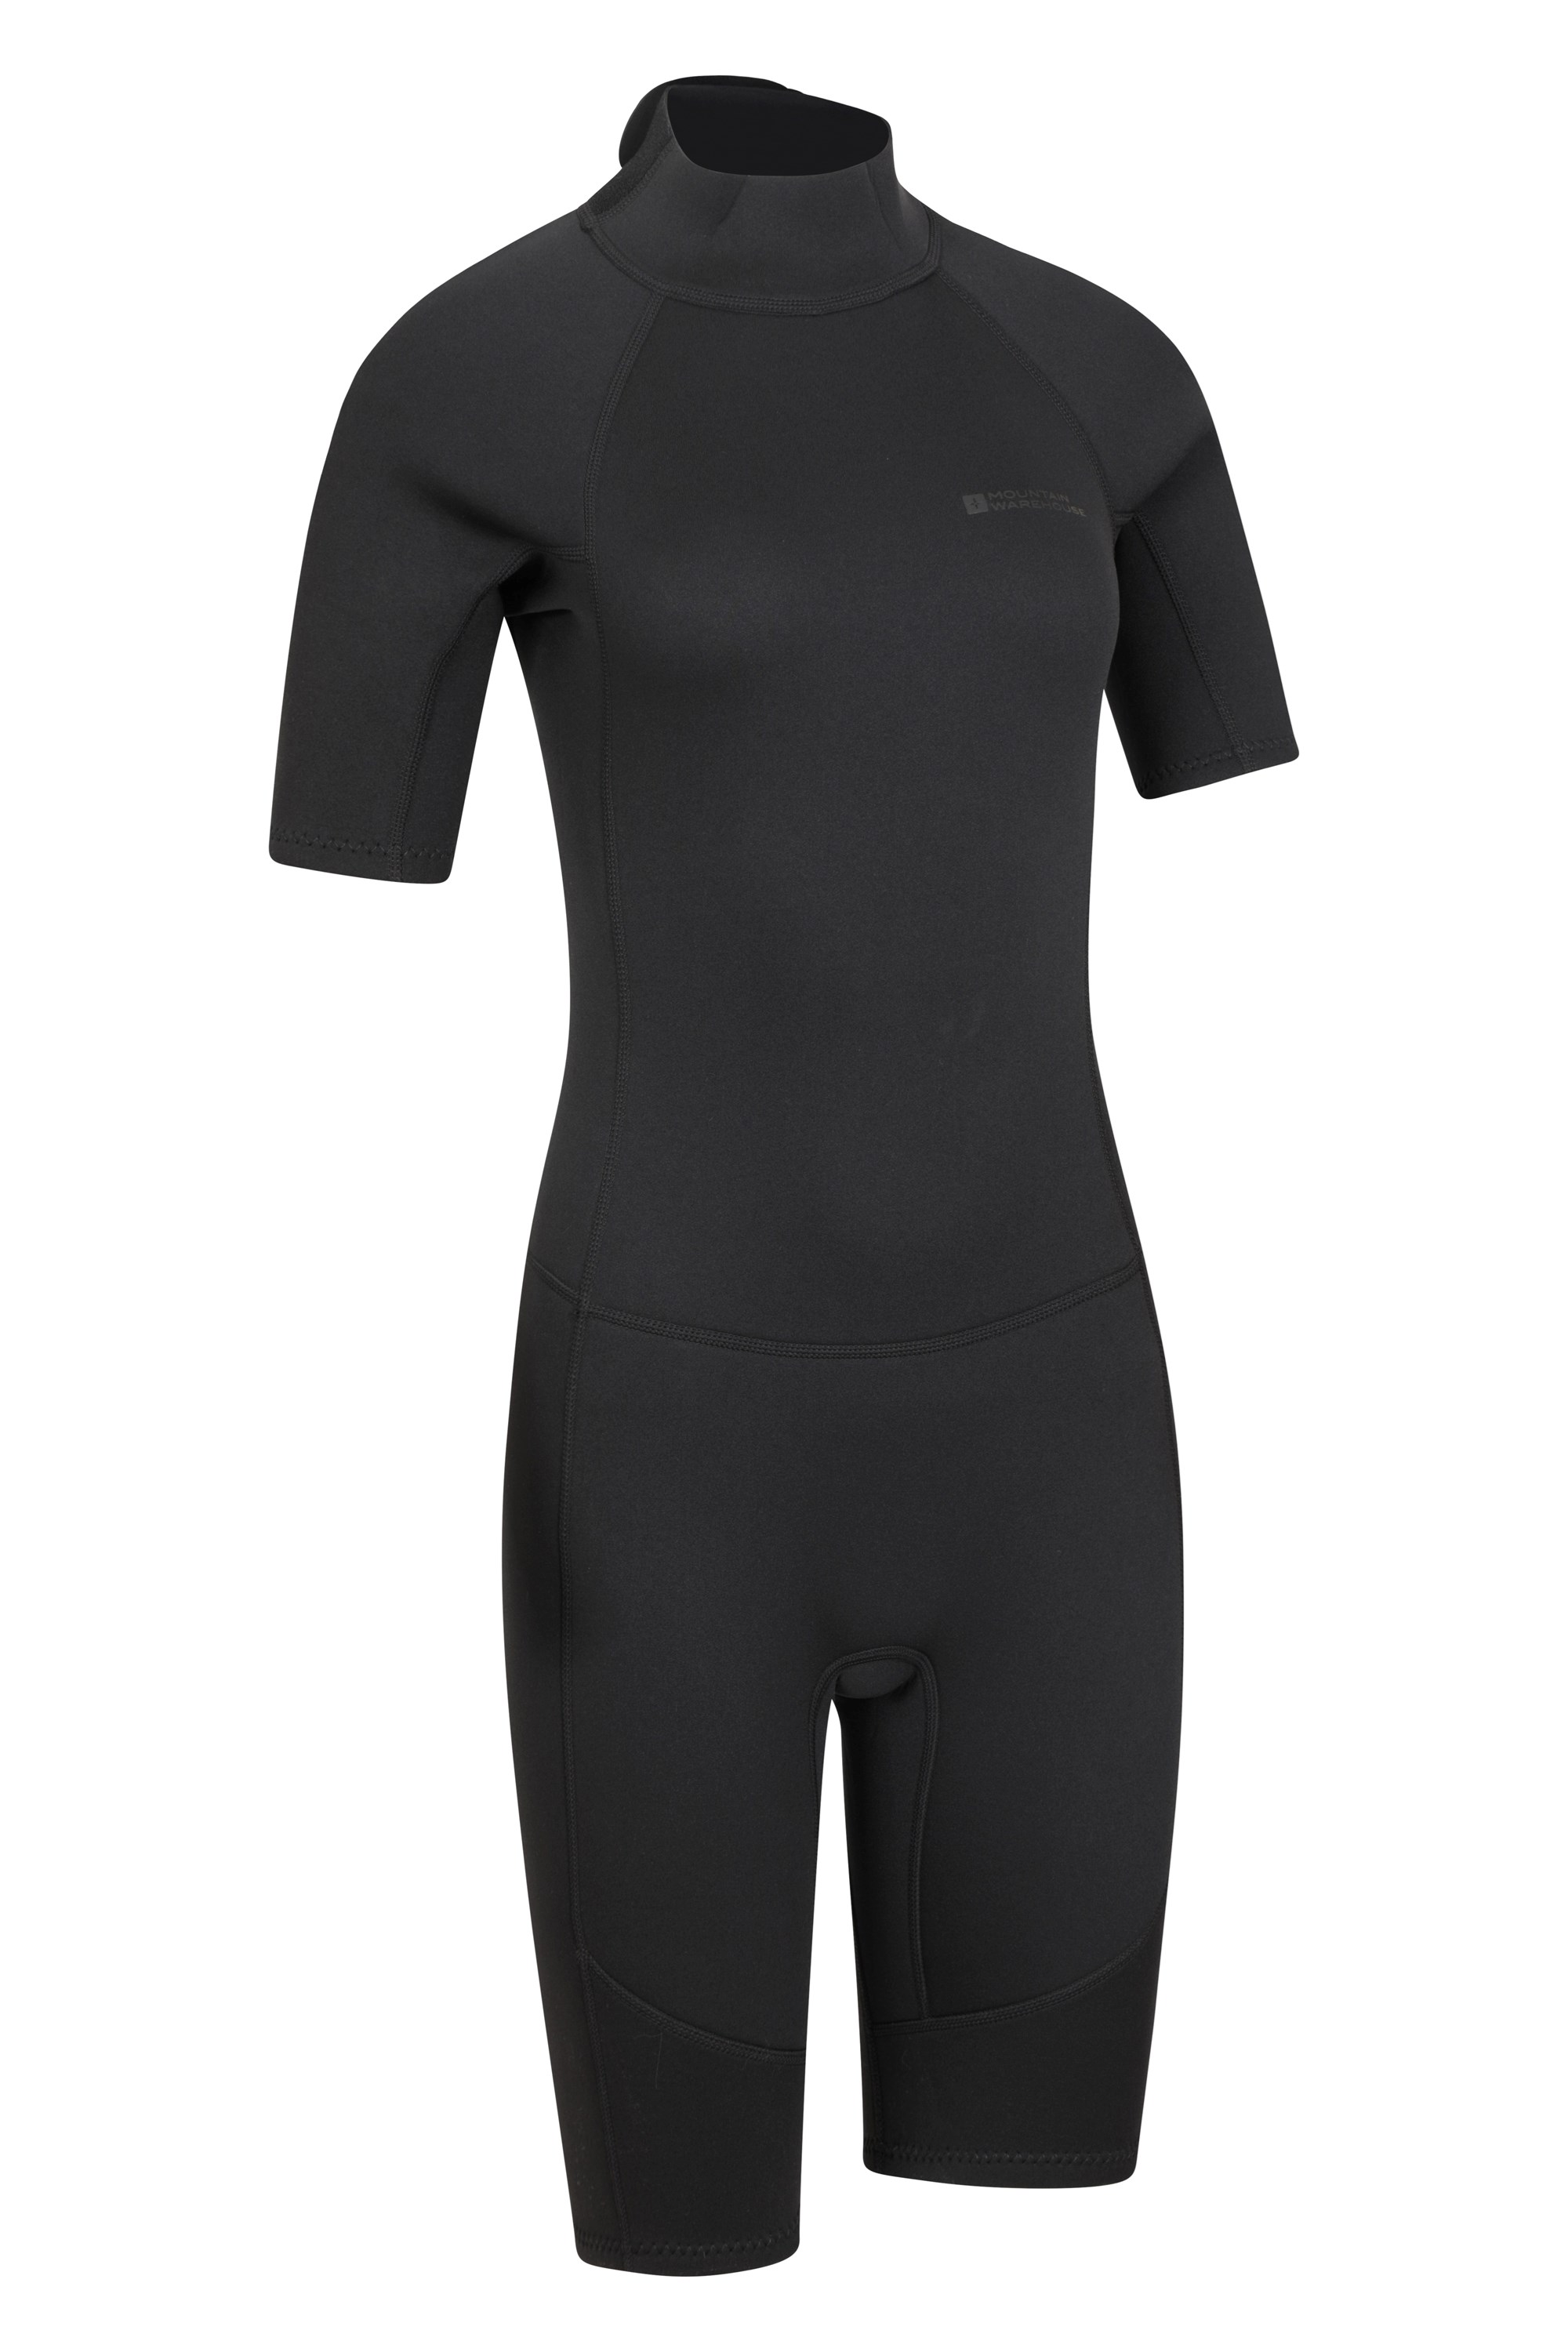 Mountain Warehouse Wms Full Womens Printed Wetsuit 